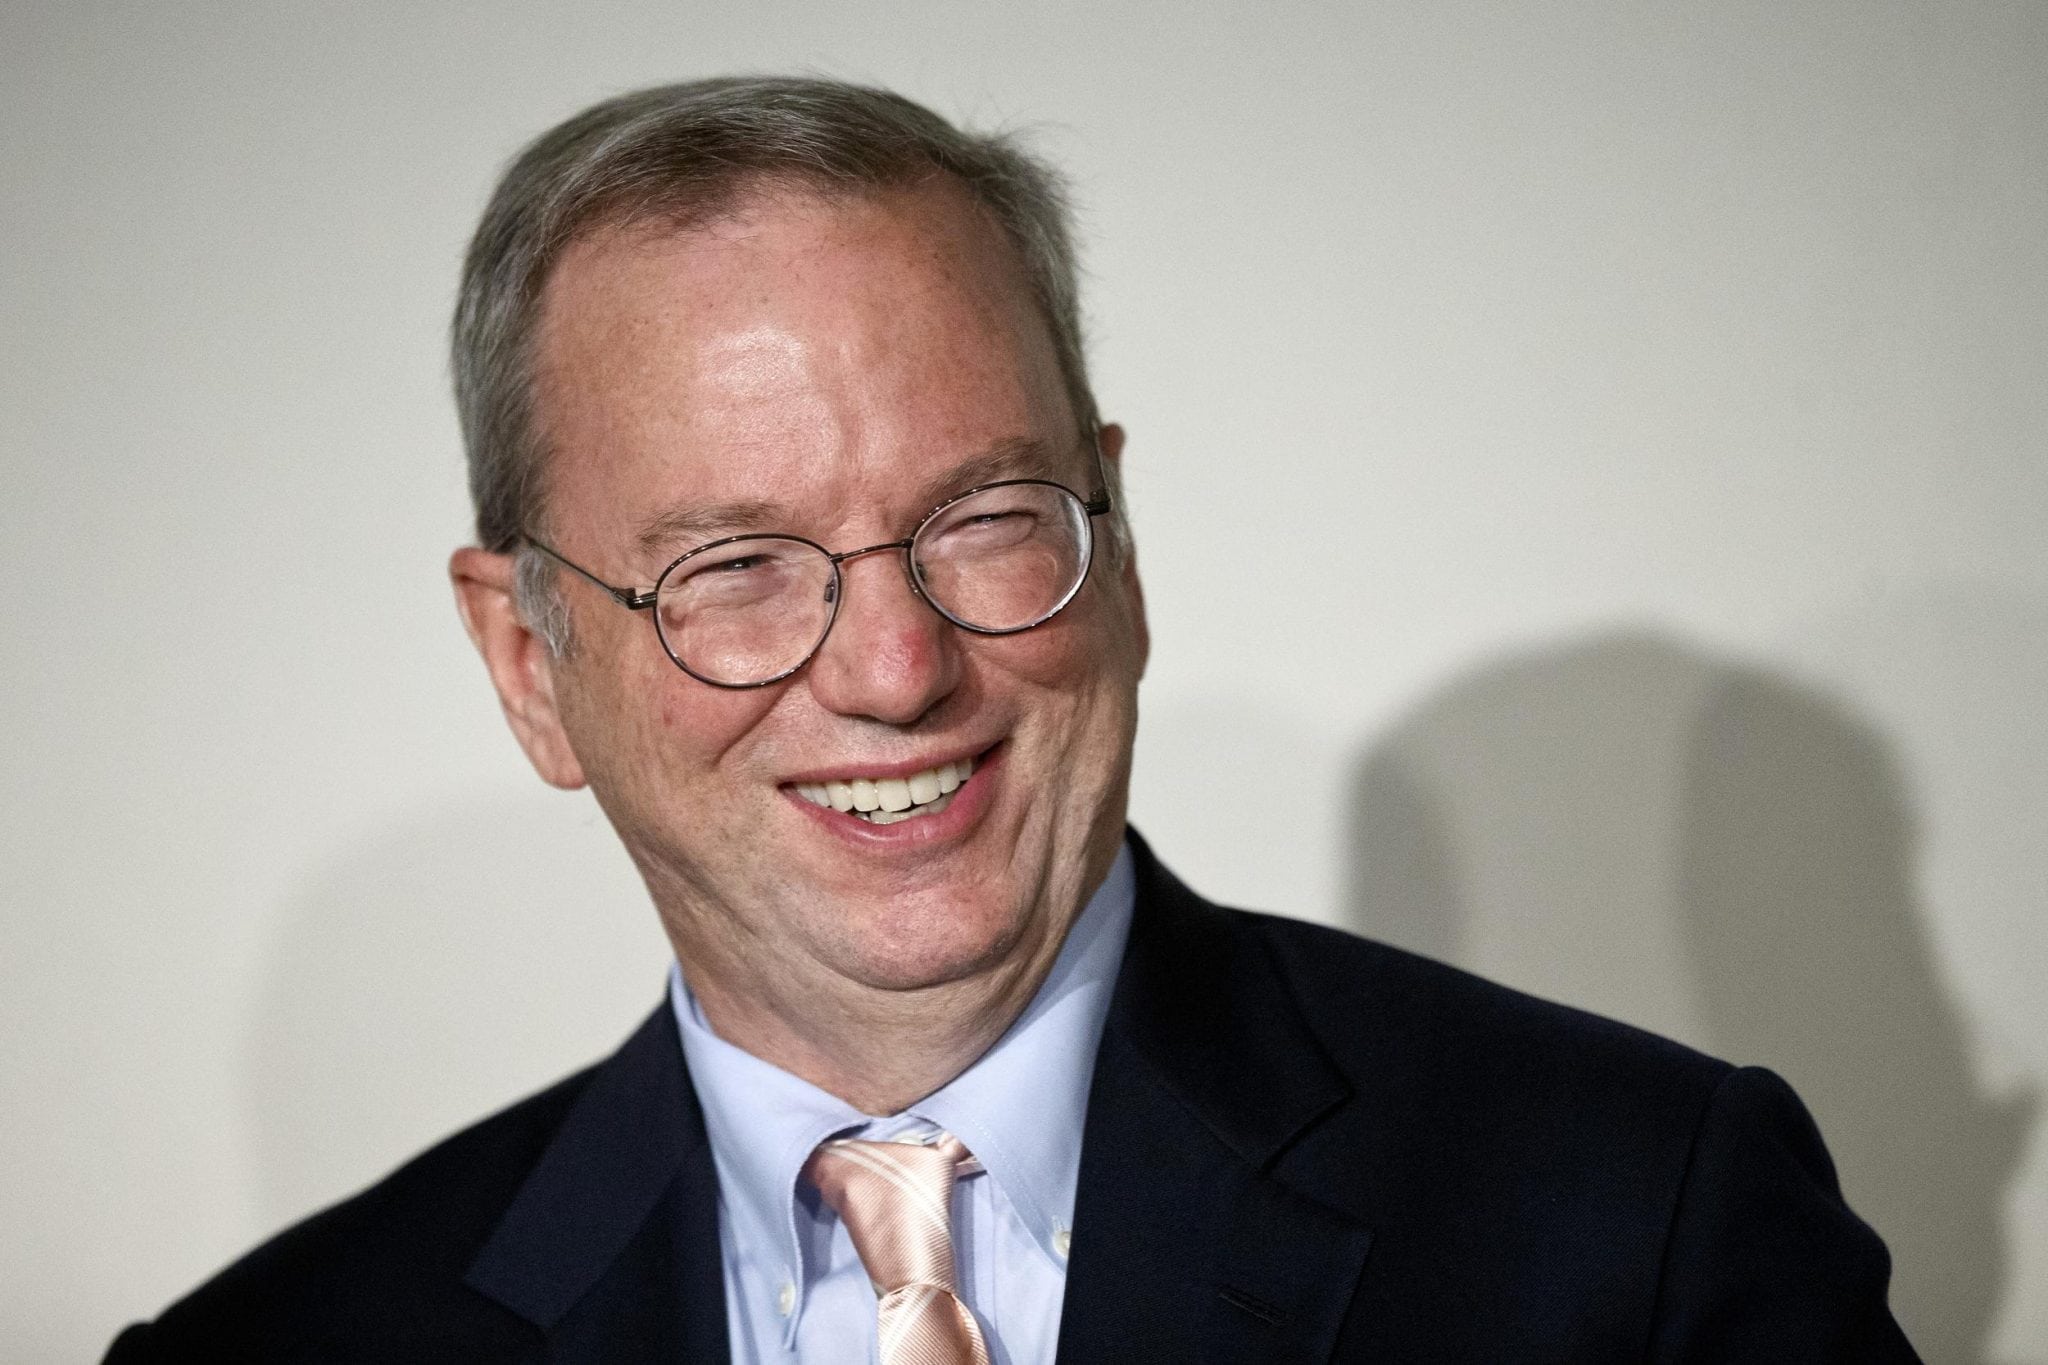 Google Executive Chairman Eric Schmidt smiles during a meeting about the 